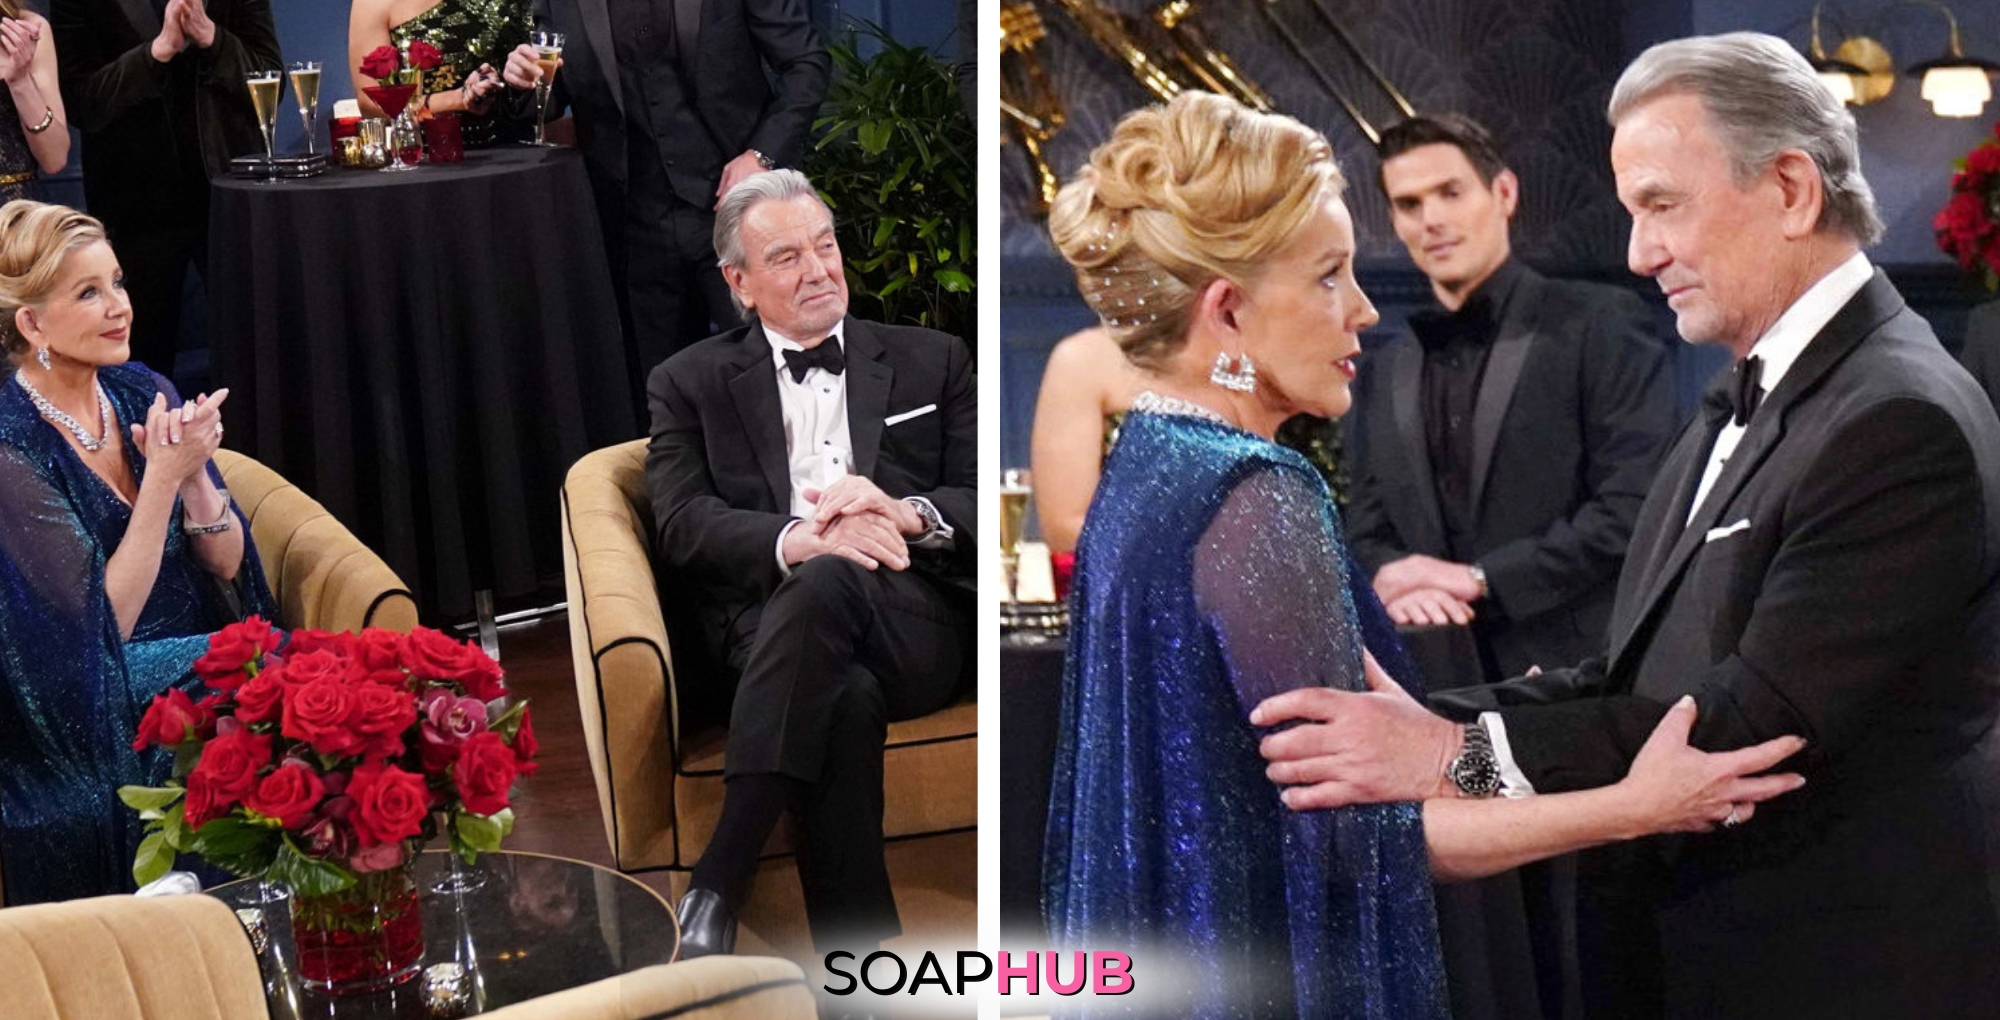 The Young and the Restless spoilers for April 12 feature Victor and Nikki with the Soap Hub logo across the bottom.